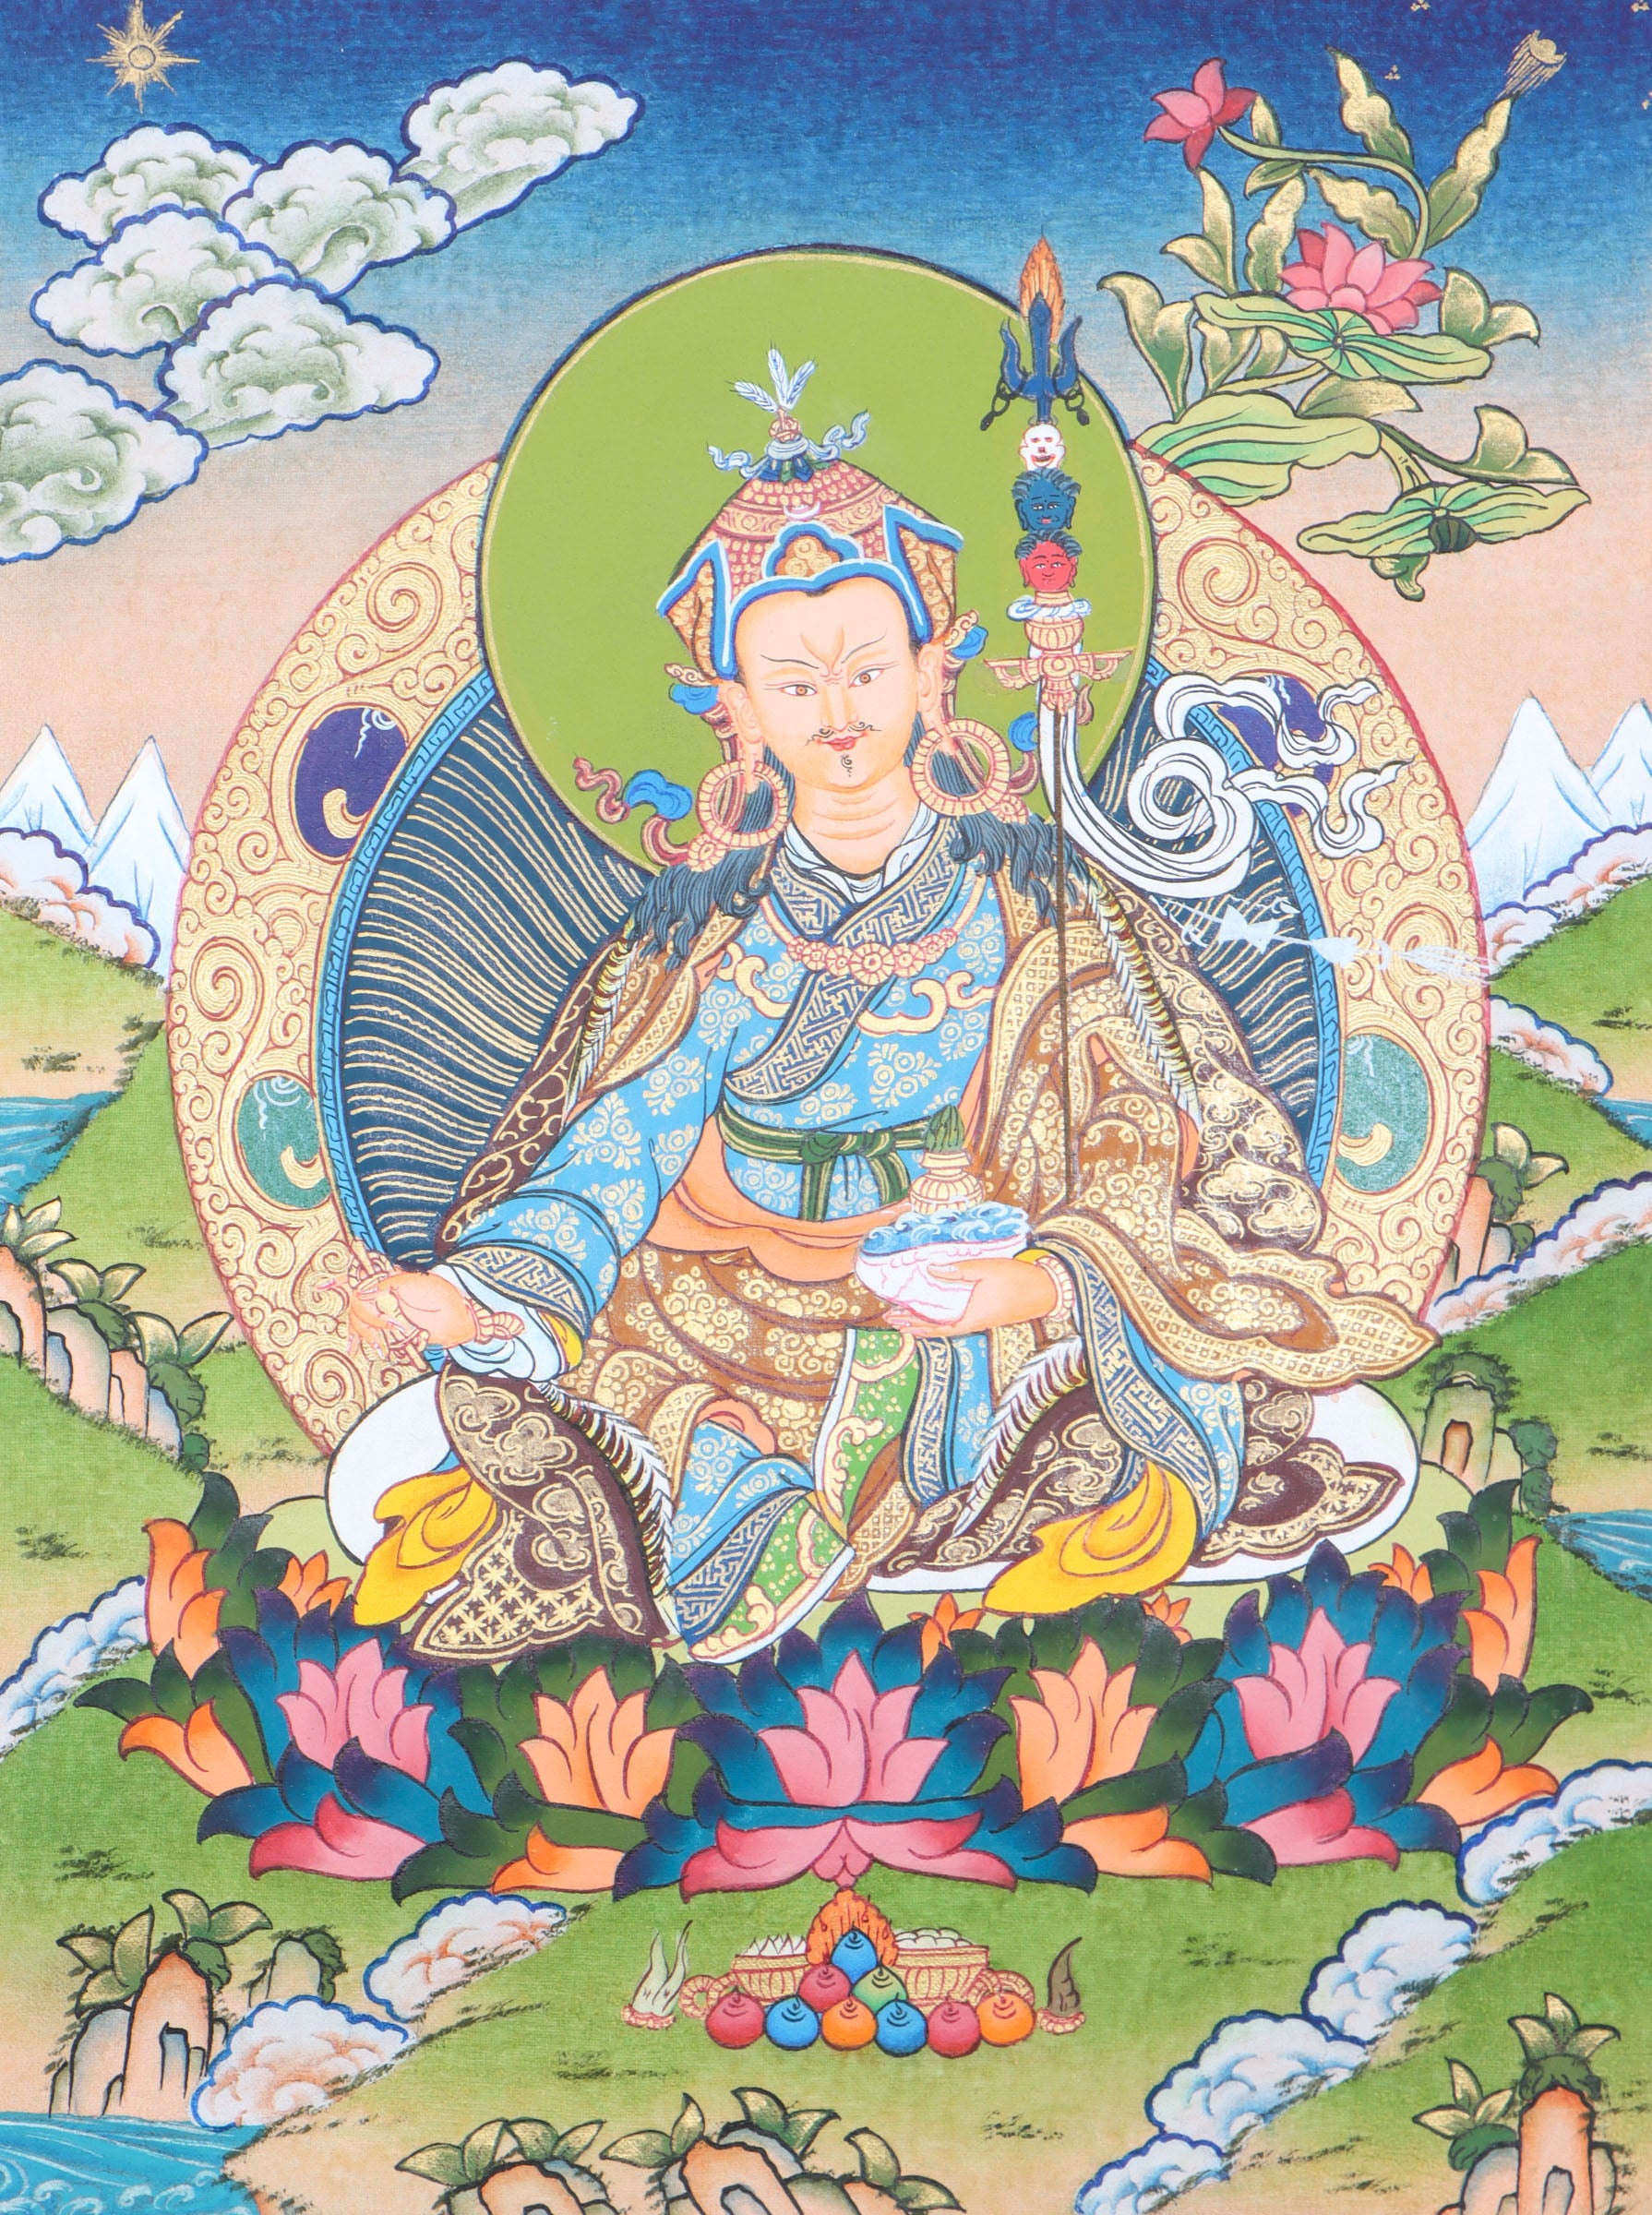 Guru thangka painting is a masterpiece that reflects the beauty and wisdom of the Himalayan culture.